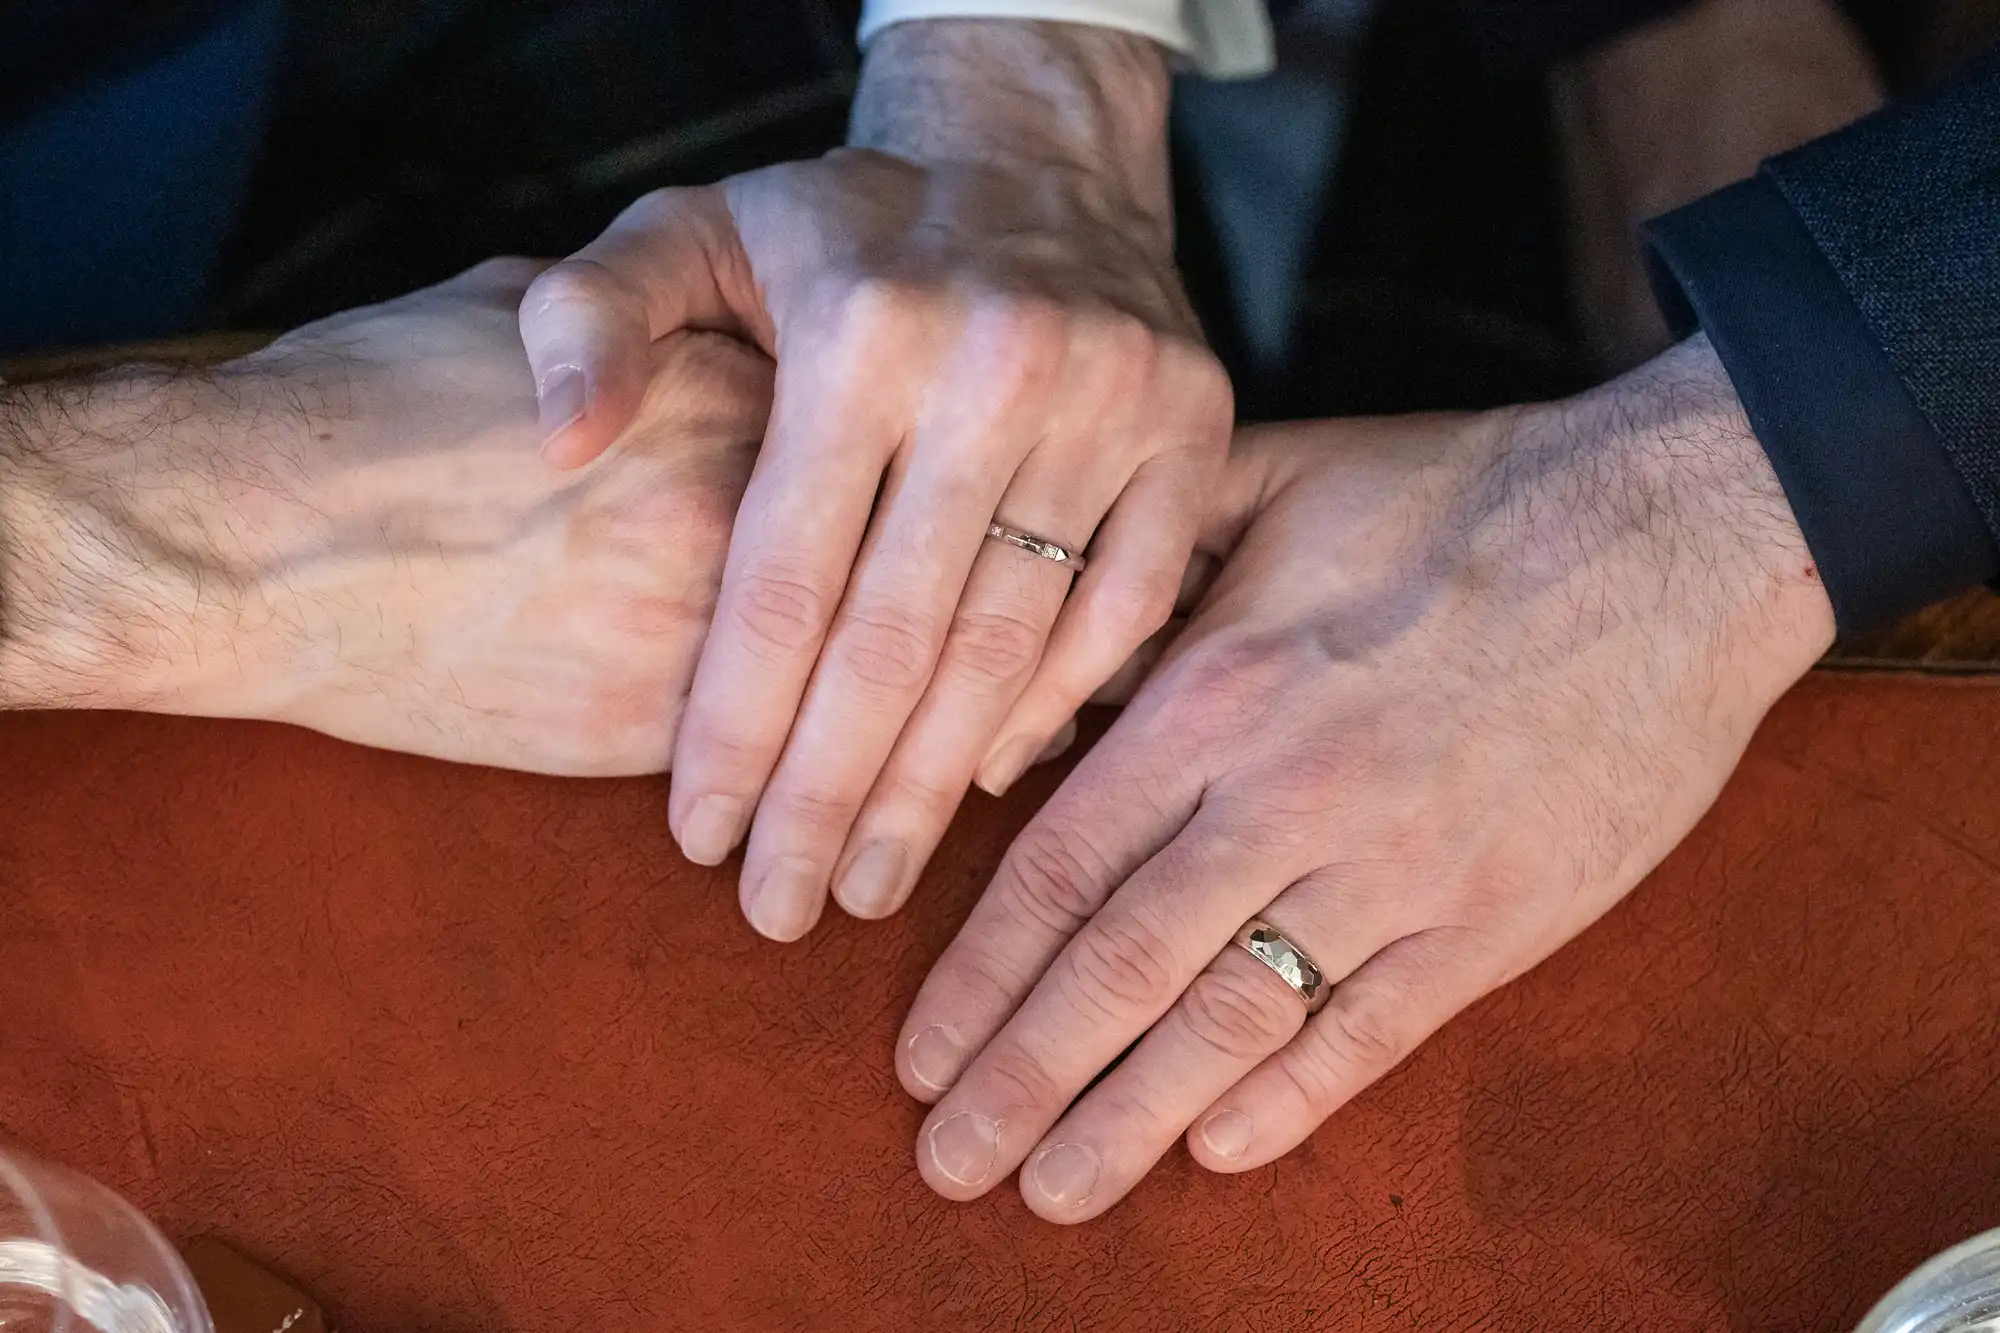 Two people holding hands on a table. Both are wearing wedding bands.